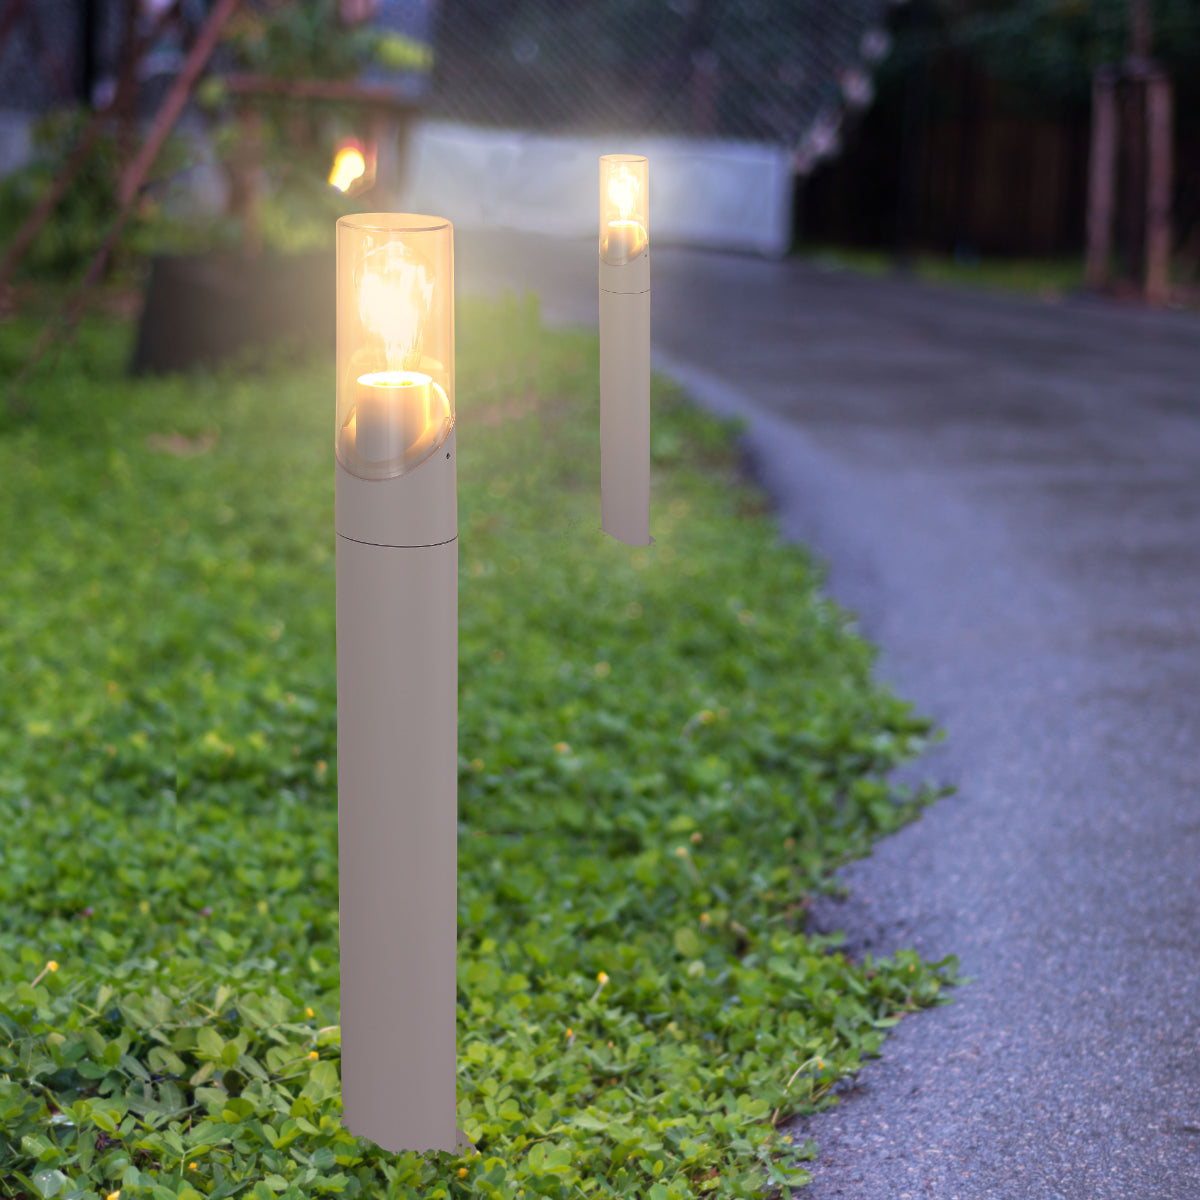 Norman Newport Outdoor Bollard Pathway Fence-top Light E27 White 182-03428 in play